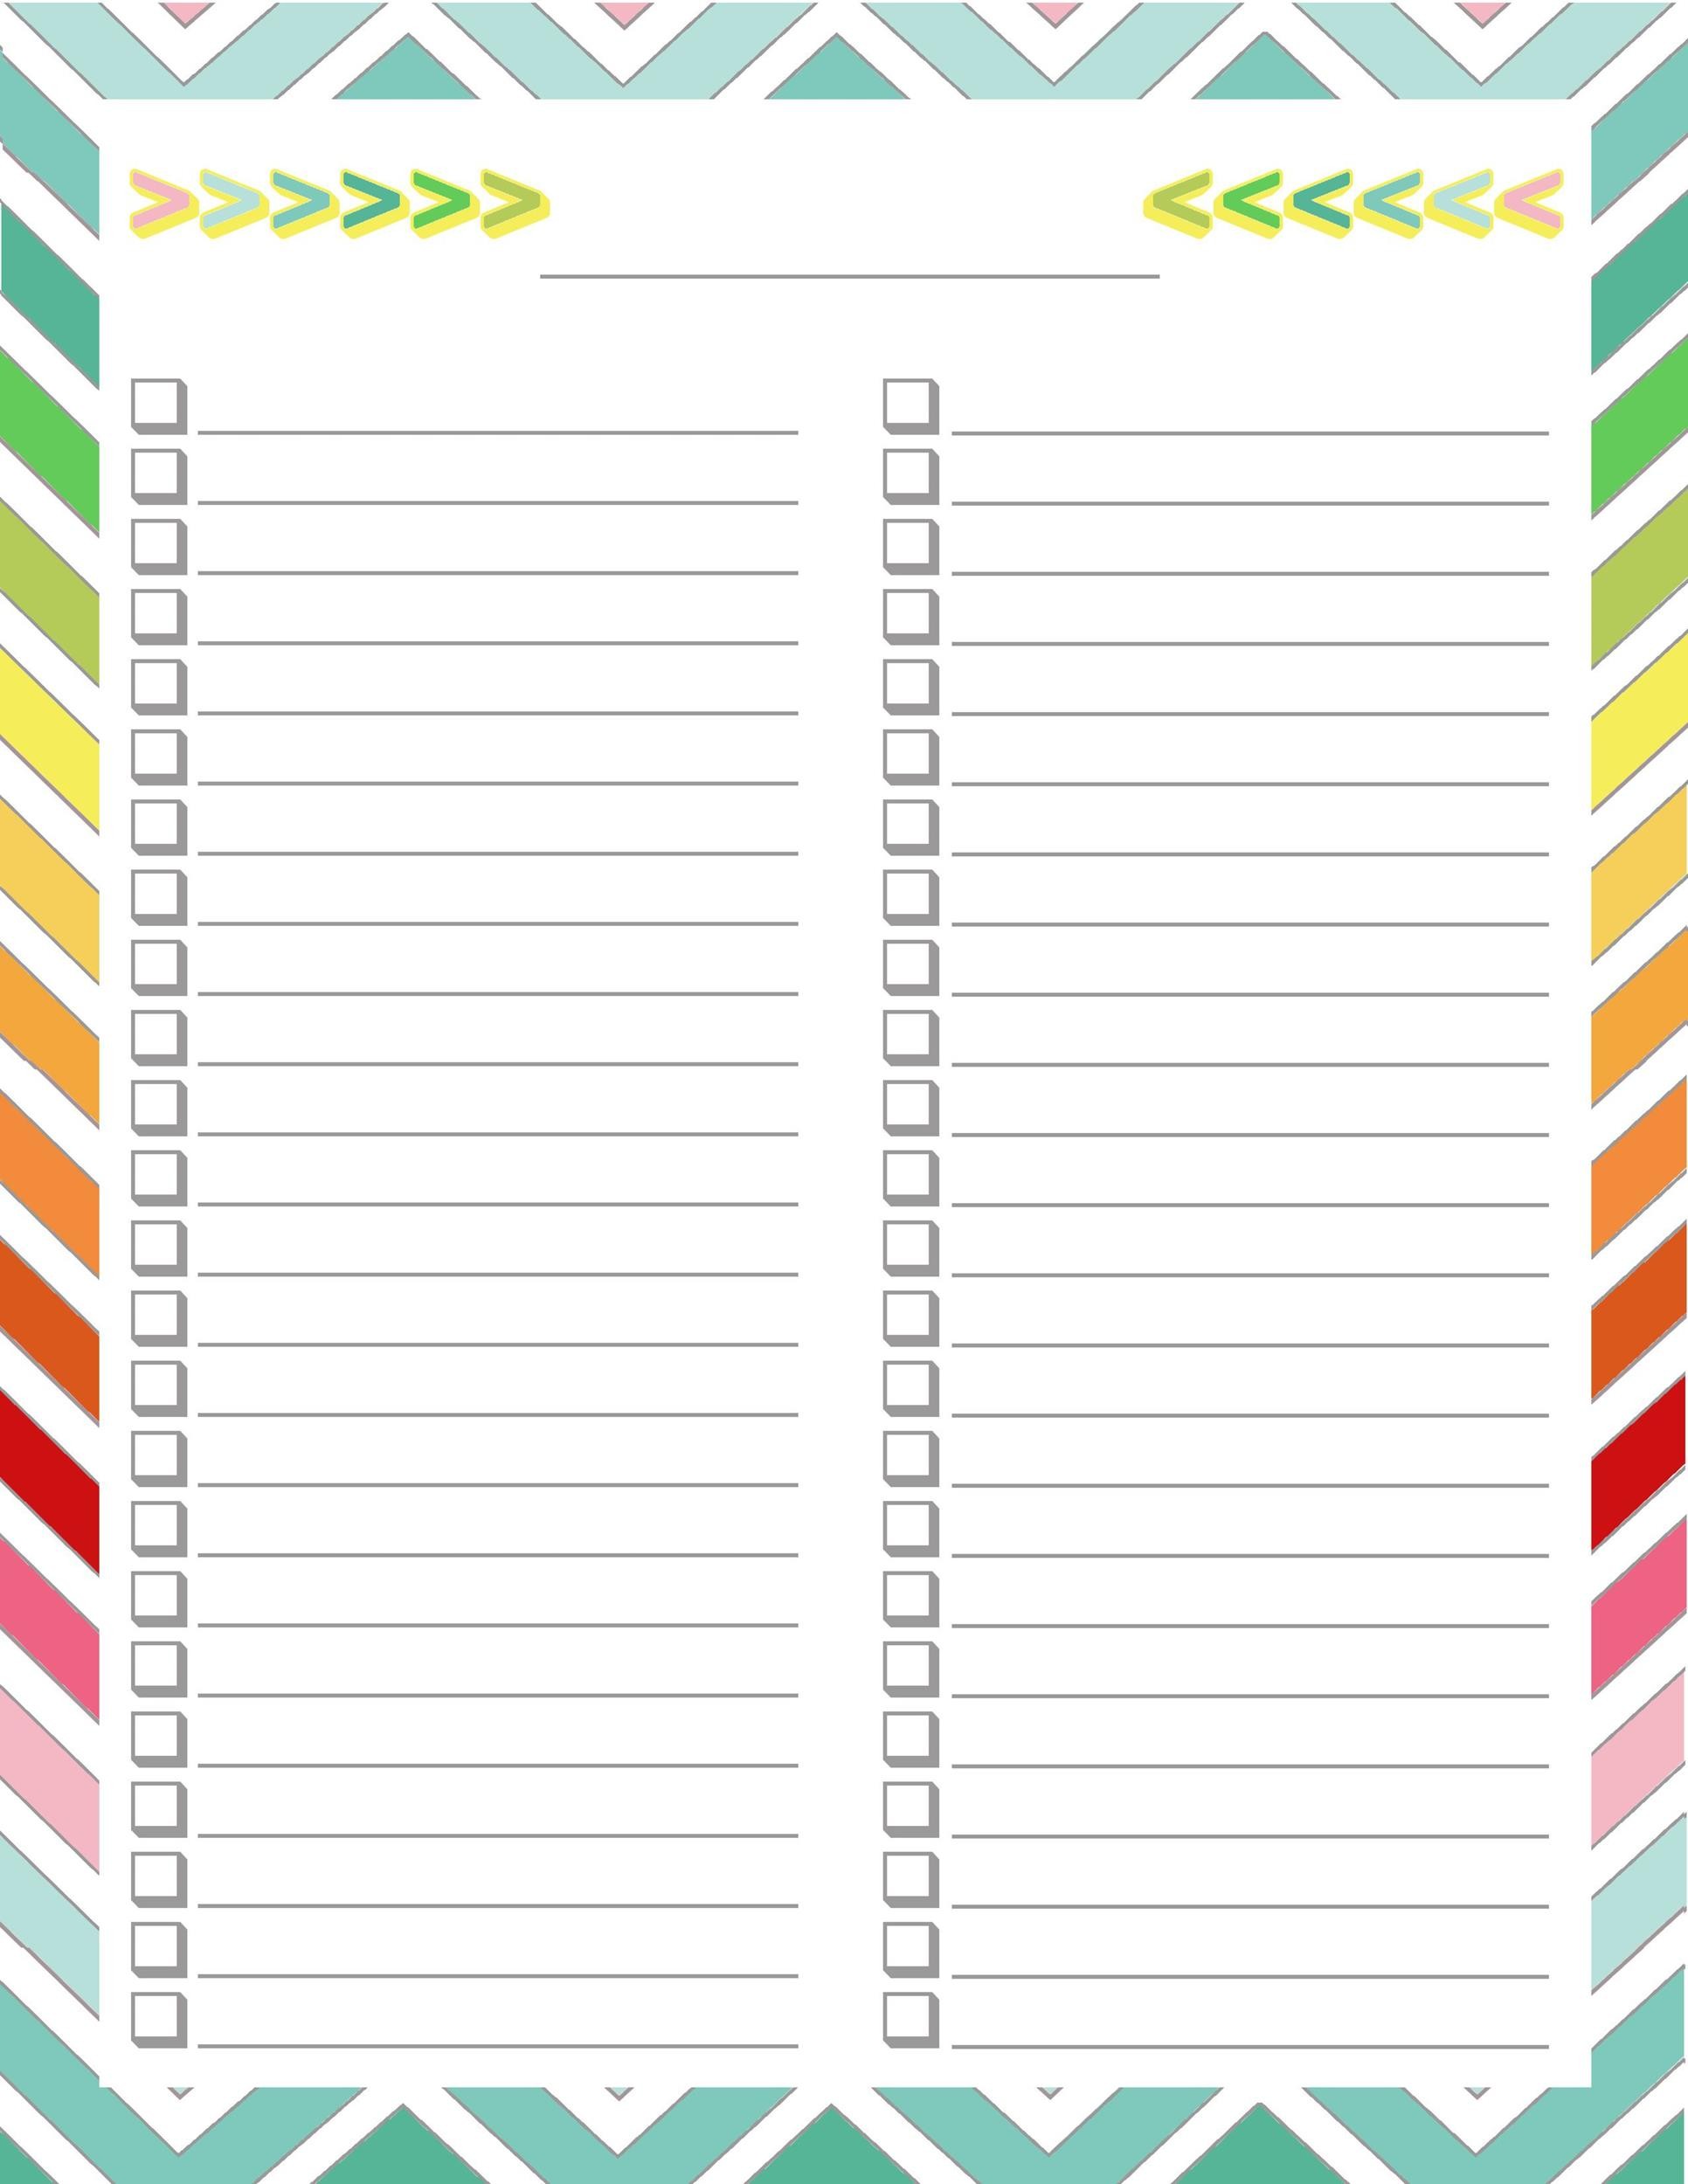 47 Printable To Do List Checklist Templates Excel Word Pdf 12644 Hot